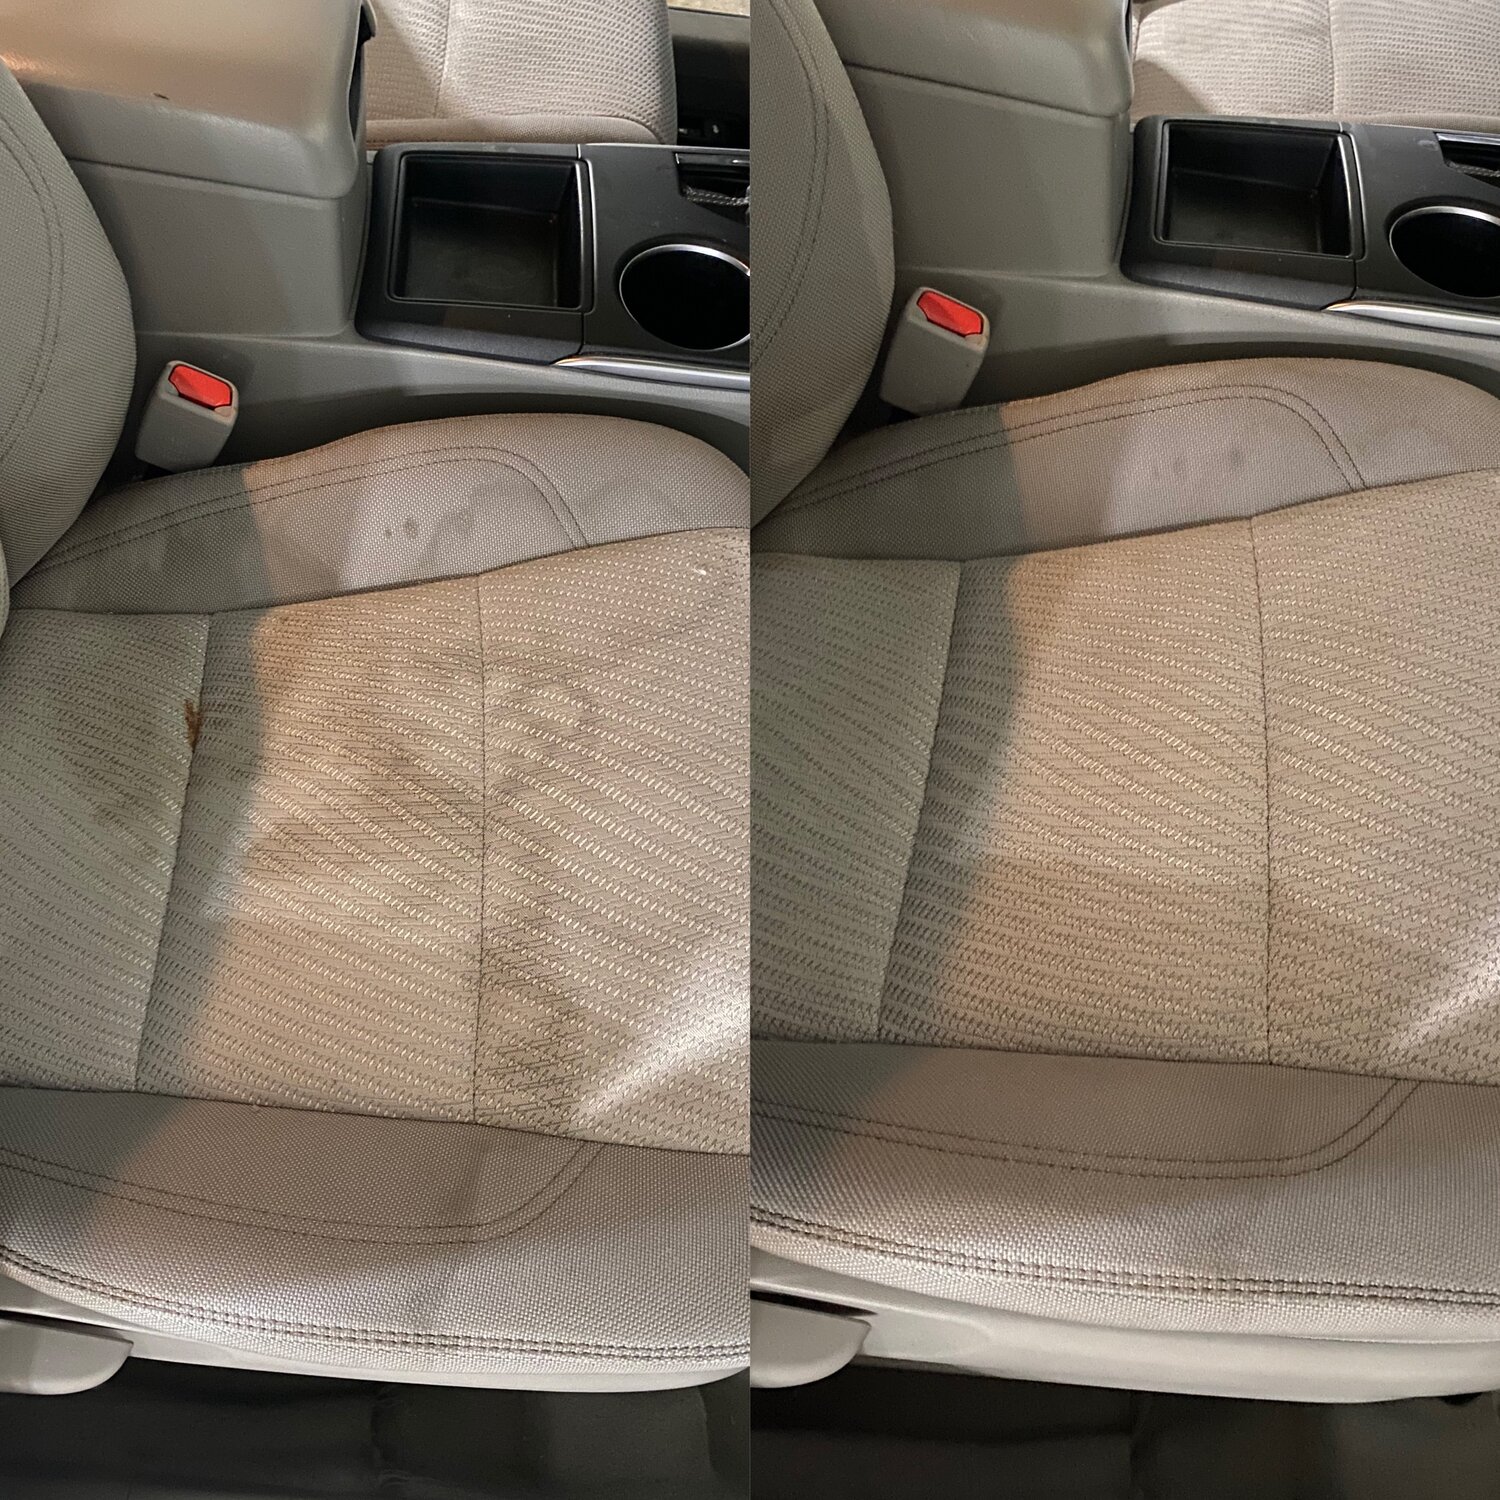 Dallas-Fort Worth Mobile Interior Car Cleaning Services